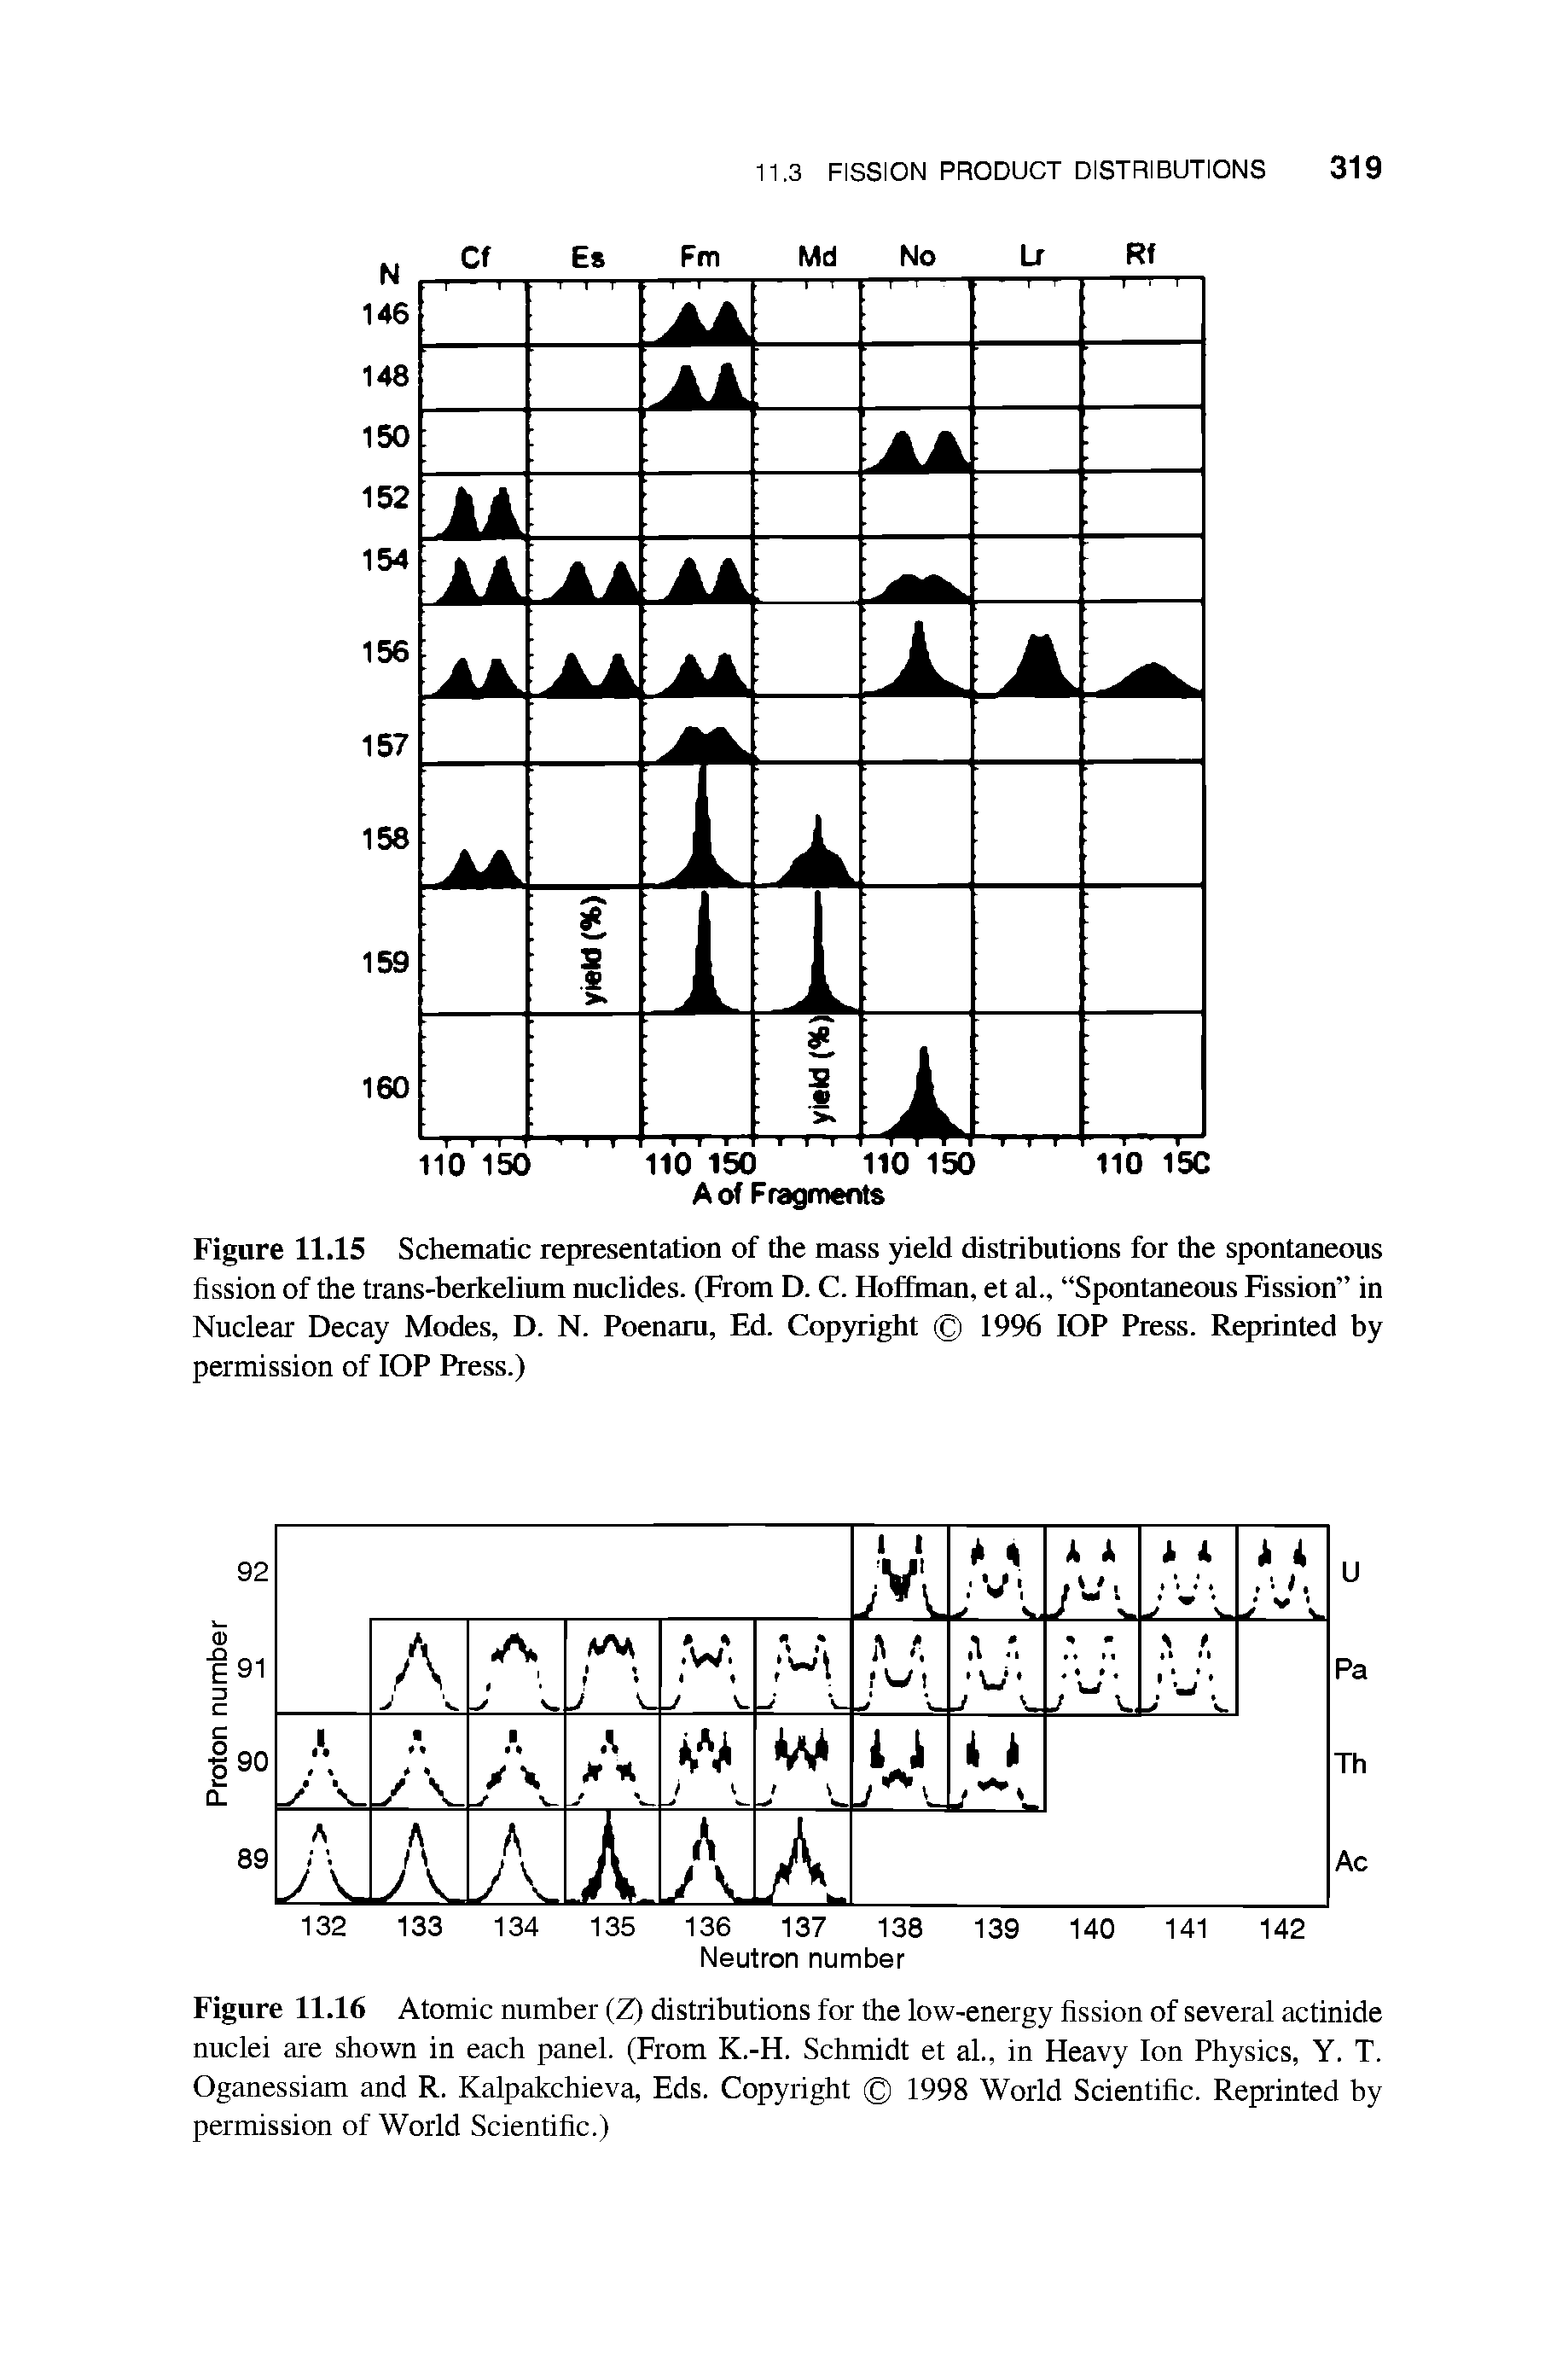 Figure 11.15 Schematic representation of the mass yield distributions for the spontaneous fission of the trans-berkelium nuclides. (From D. C. Hoffman, et al., Spontaneous Fission in Nuclear Decay Modes, D. N. Poenaru, Ed. Copyright 1996 IOP Press. Reprinted by permission of IOP Press.)...